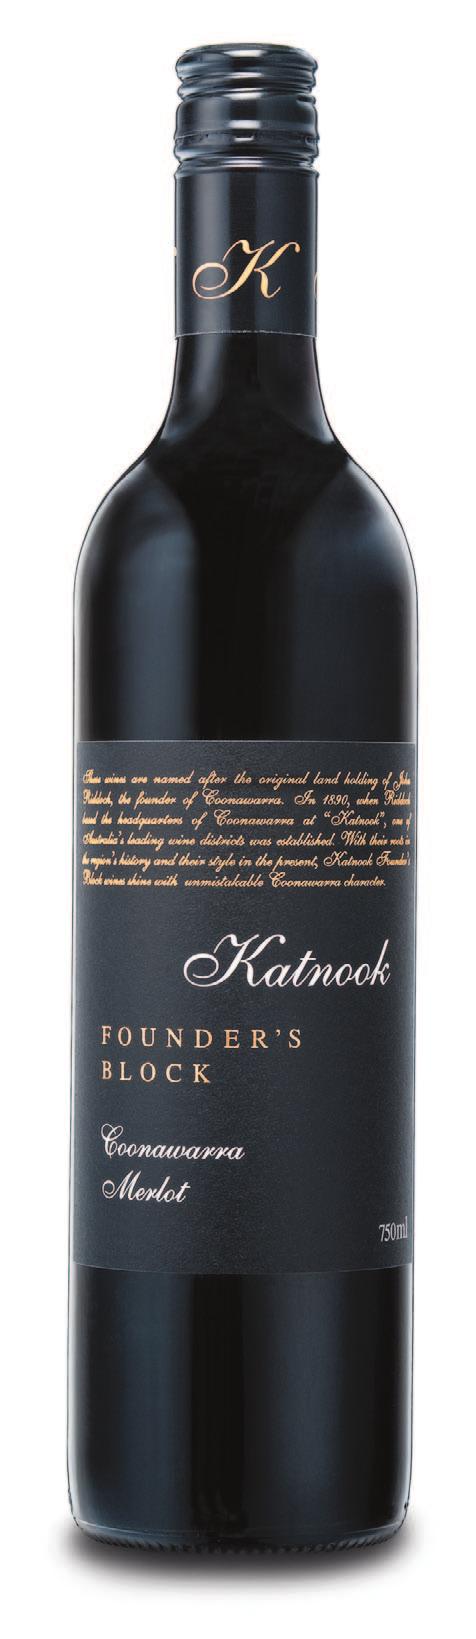 Merlot 2009 With Katnook Estate pedigree, the Founder s Block range is styled for everyday drinking, inviting a modern generation of wine drinkers to enjoy the pleasures of Coonawarra wine people who